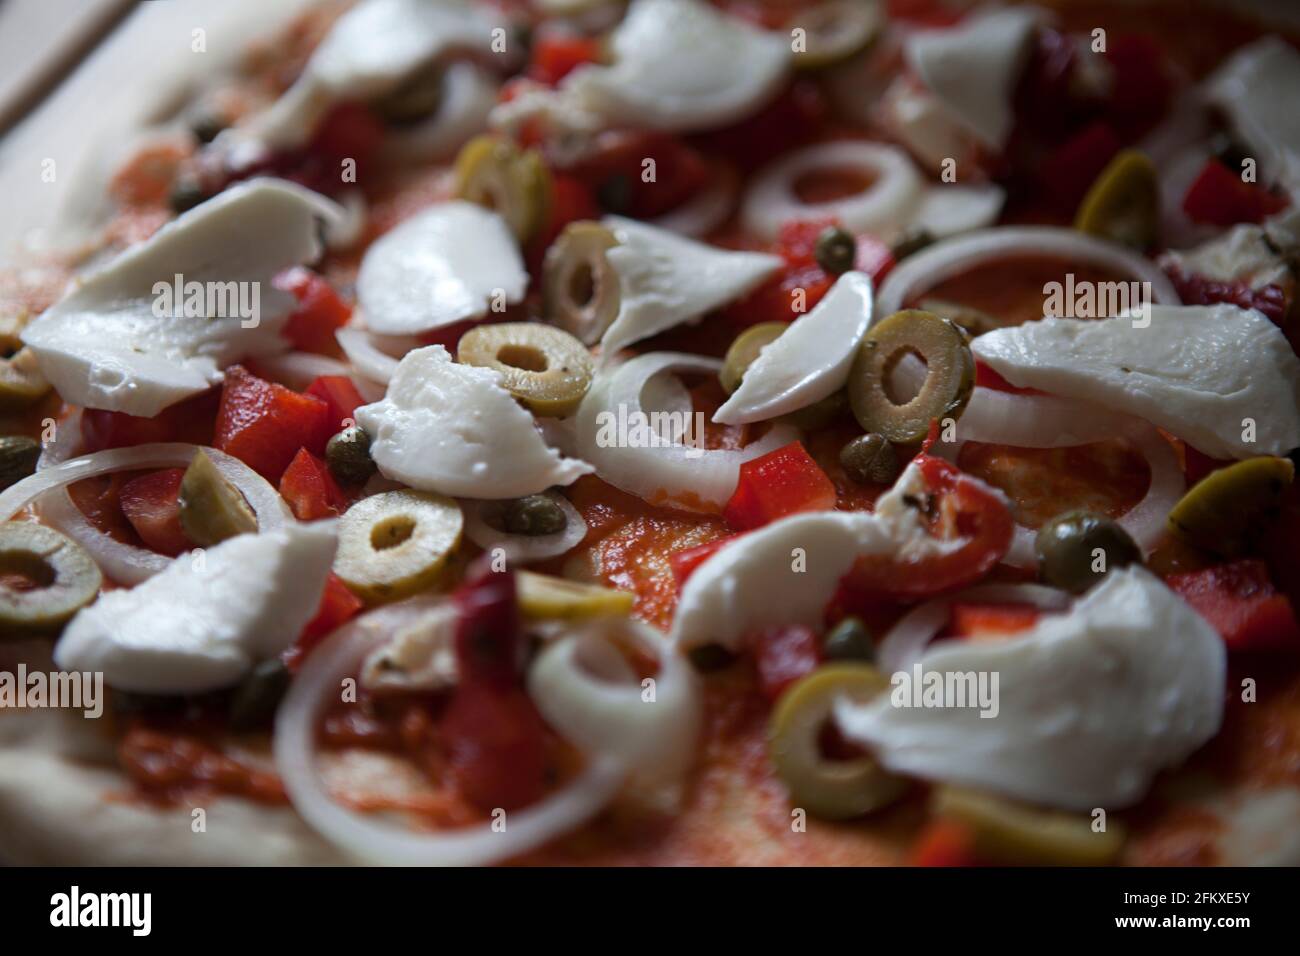 Homemade pizza before cooking, tomato base topped with red bell peppers, onions, green olives, capers and buffalo mozzarella Stock Photo